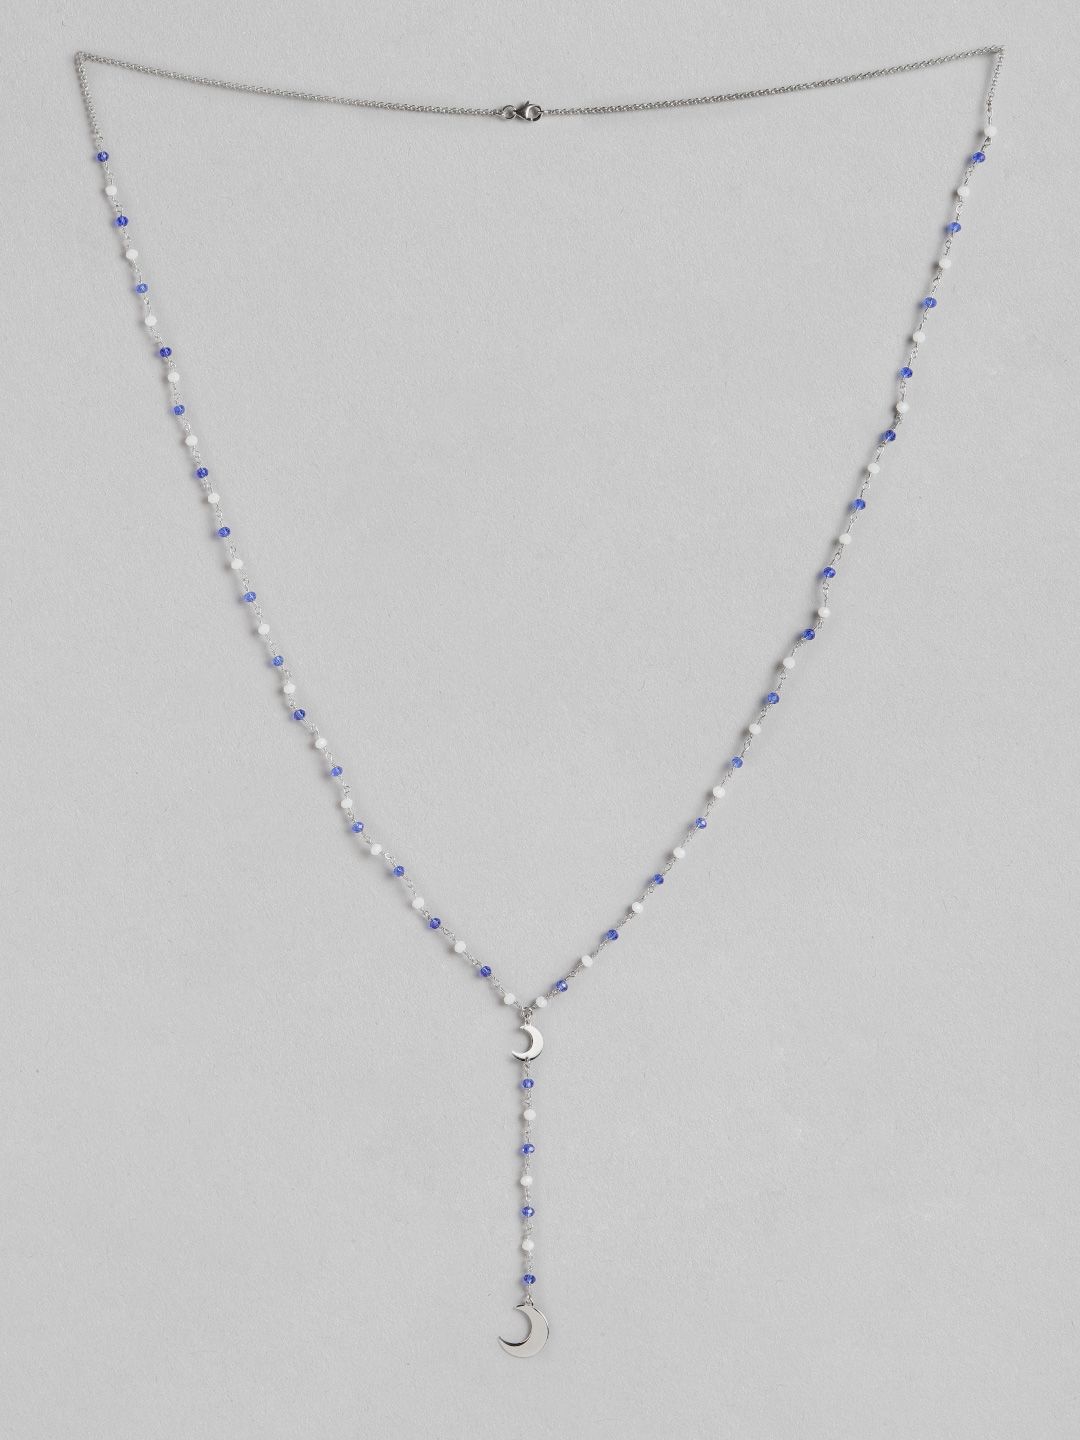 Carlton London Silver-Toned & Blue Brass Rhodium-Plated Necklace Price in India